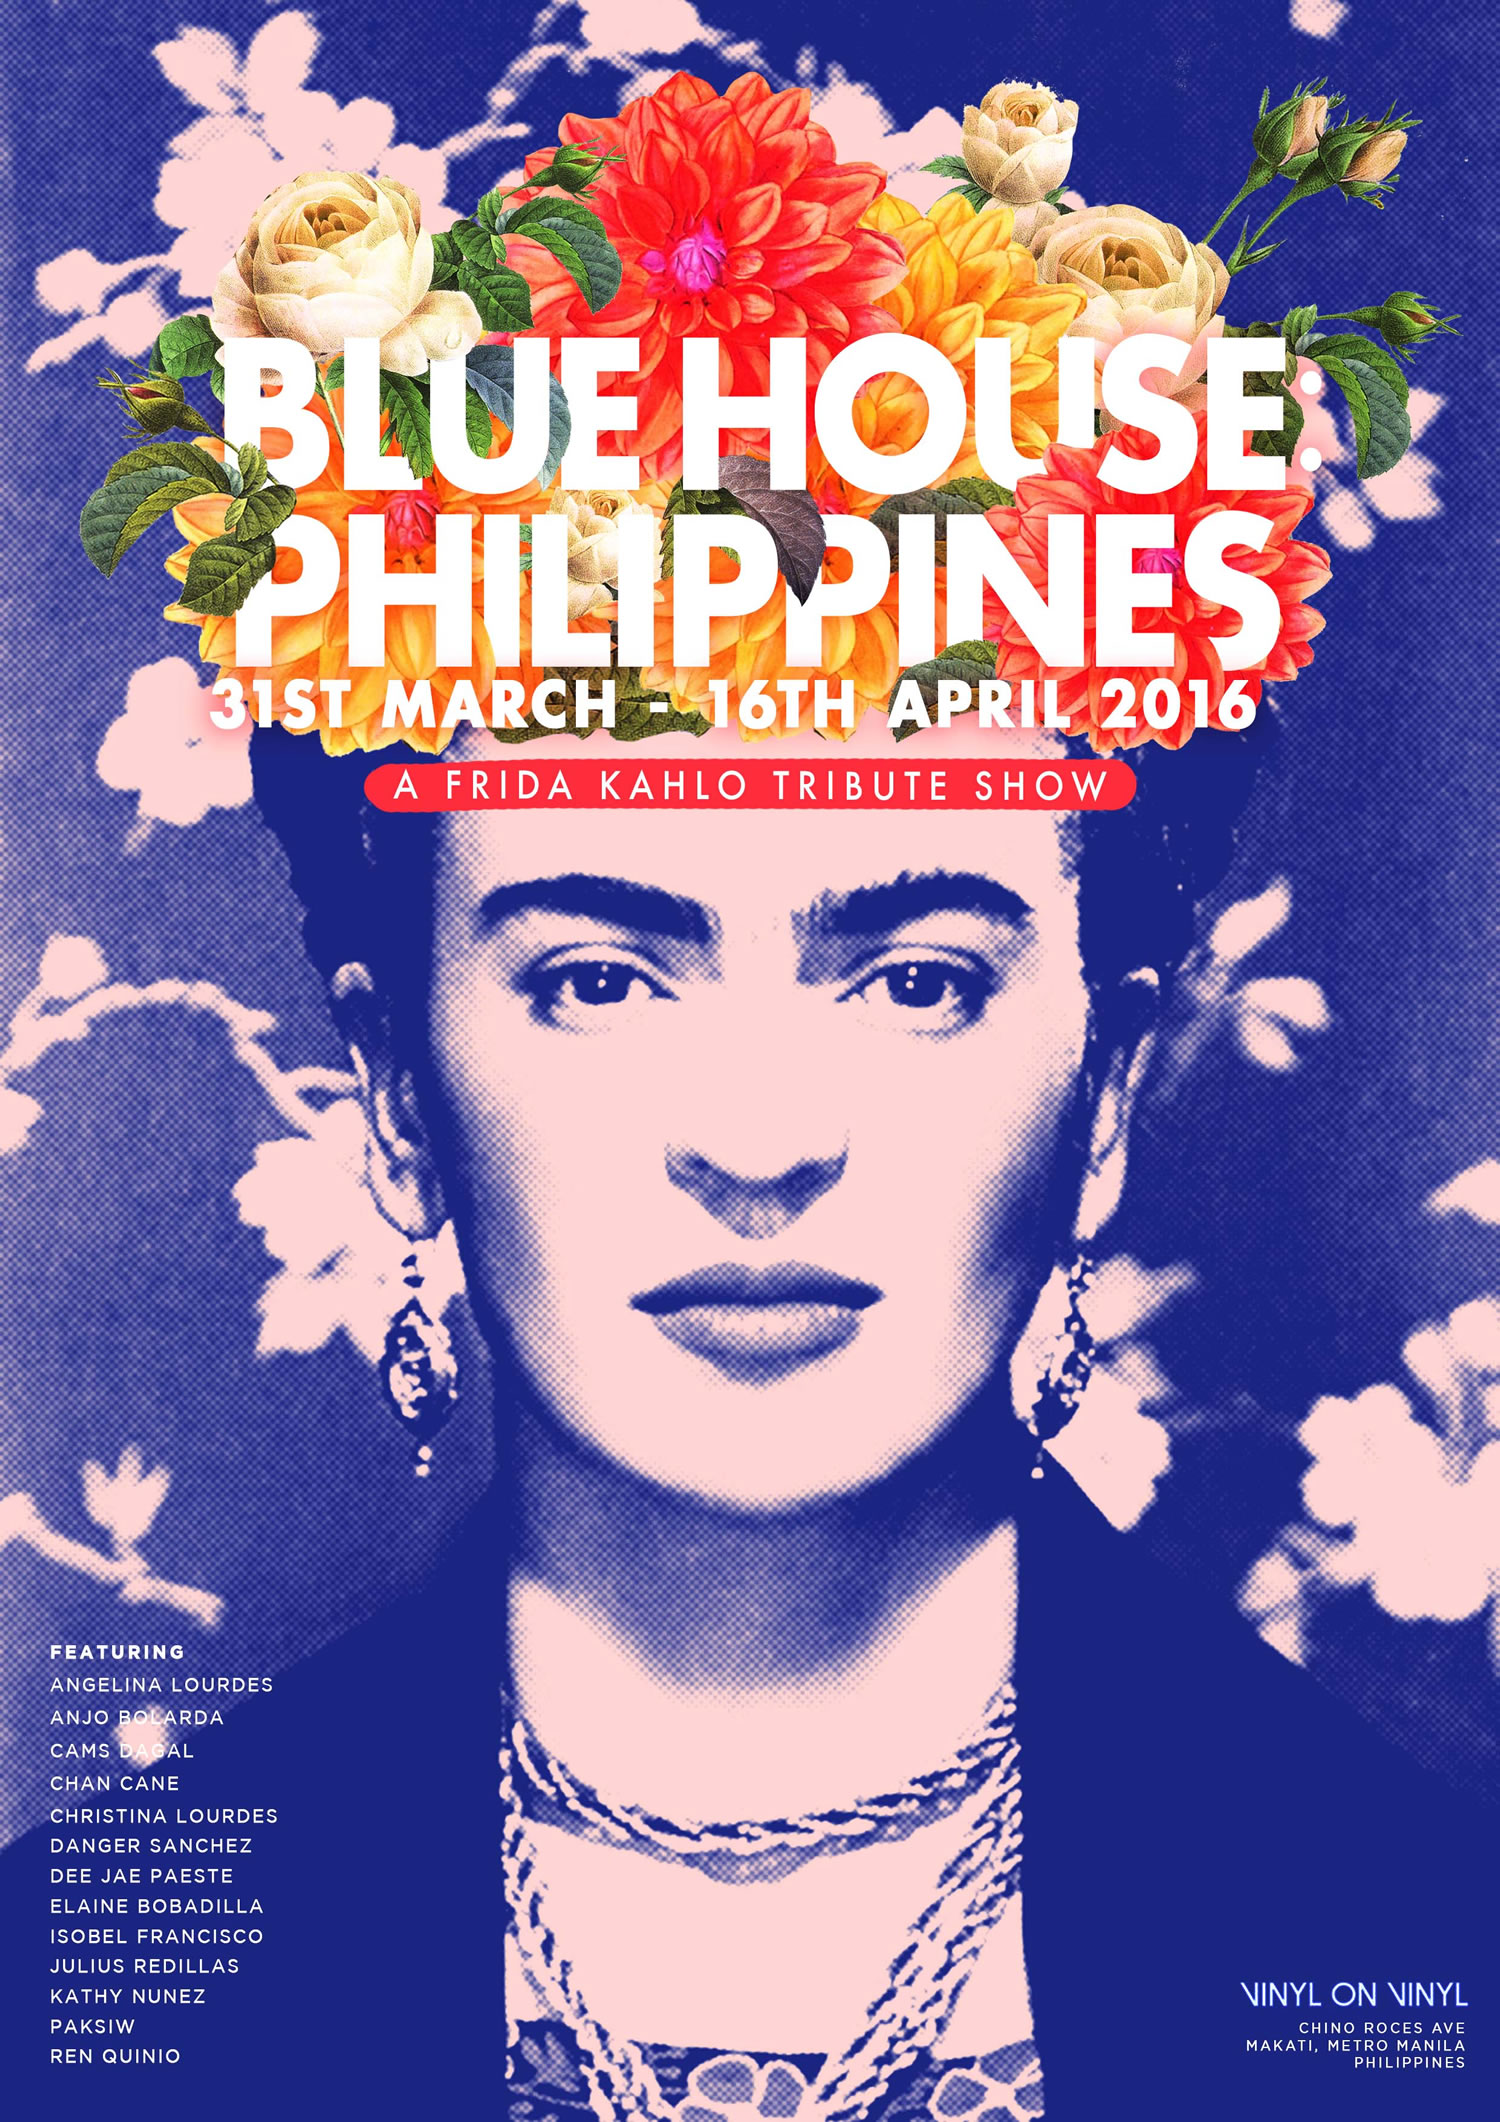 Blue House: Philippines clock Thursday, March 31 at 7 PM Next Week · 77–93° Mostly Sunny pin Show Map Vinyl on Vinyl Gallery 2135 Chino Roces Avenue, 1200 Makati, Philippines envelope Blue House: Philippines is a tribute show celebrating the icon that is Frida Kahlo. Kicking off in Manila at Vinyl on Vinyl Gallery, the show will feature modern day interpretations of Frida Kahlo and her body of work through the eyes of local and international artists across a spectrum of mediums. #bluehouseph Artist Lineup: Angelina Lourdes, Anjo Bolarda, Cams Dagal, Chan Cane, Christina Lourdes, Danger Sanchez, Dee Jae Paeste, Elaine Bobadilla, Isobel Francisco, Julius Redillas, Kathy Nunez, Paksiw, Ren Quinio 'Blue House: Philippines' runs from 31st March - 16th April 2016 at Vinyl on Vinyl Gallery.